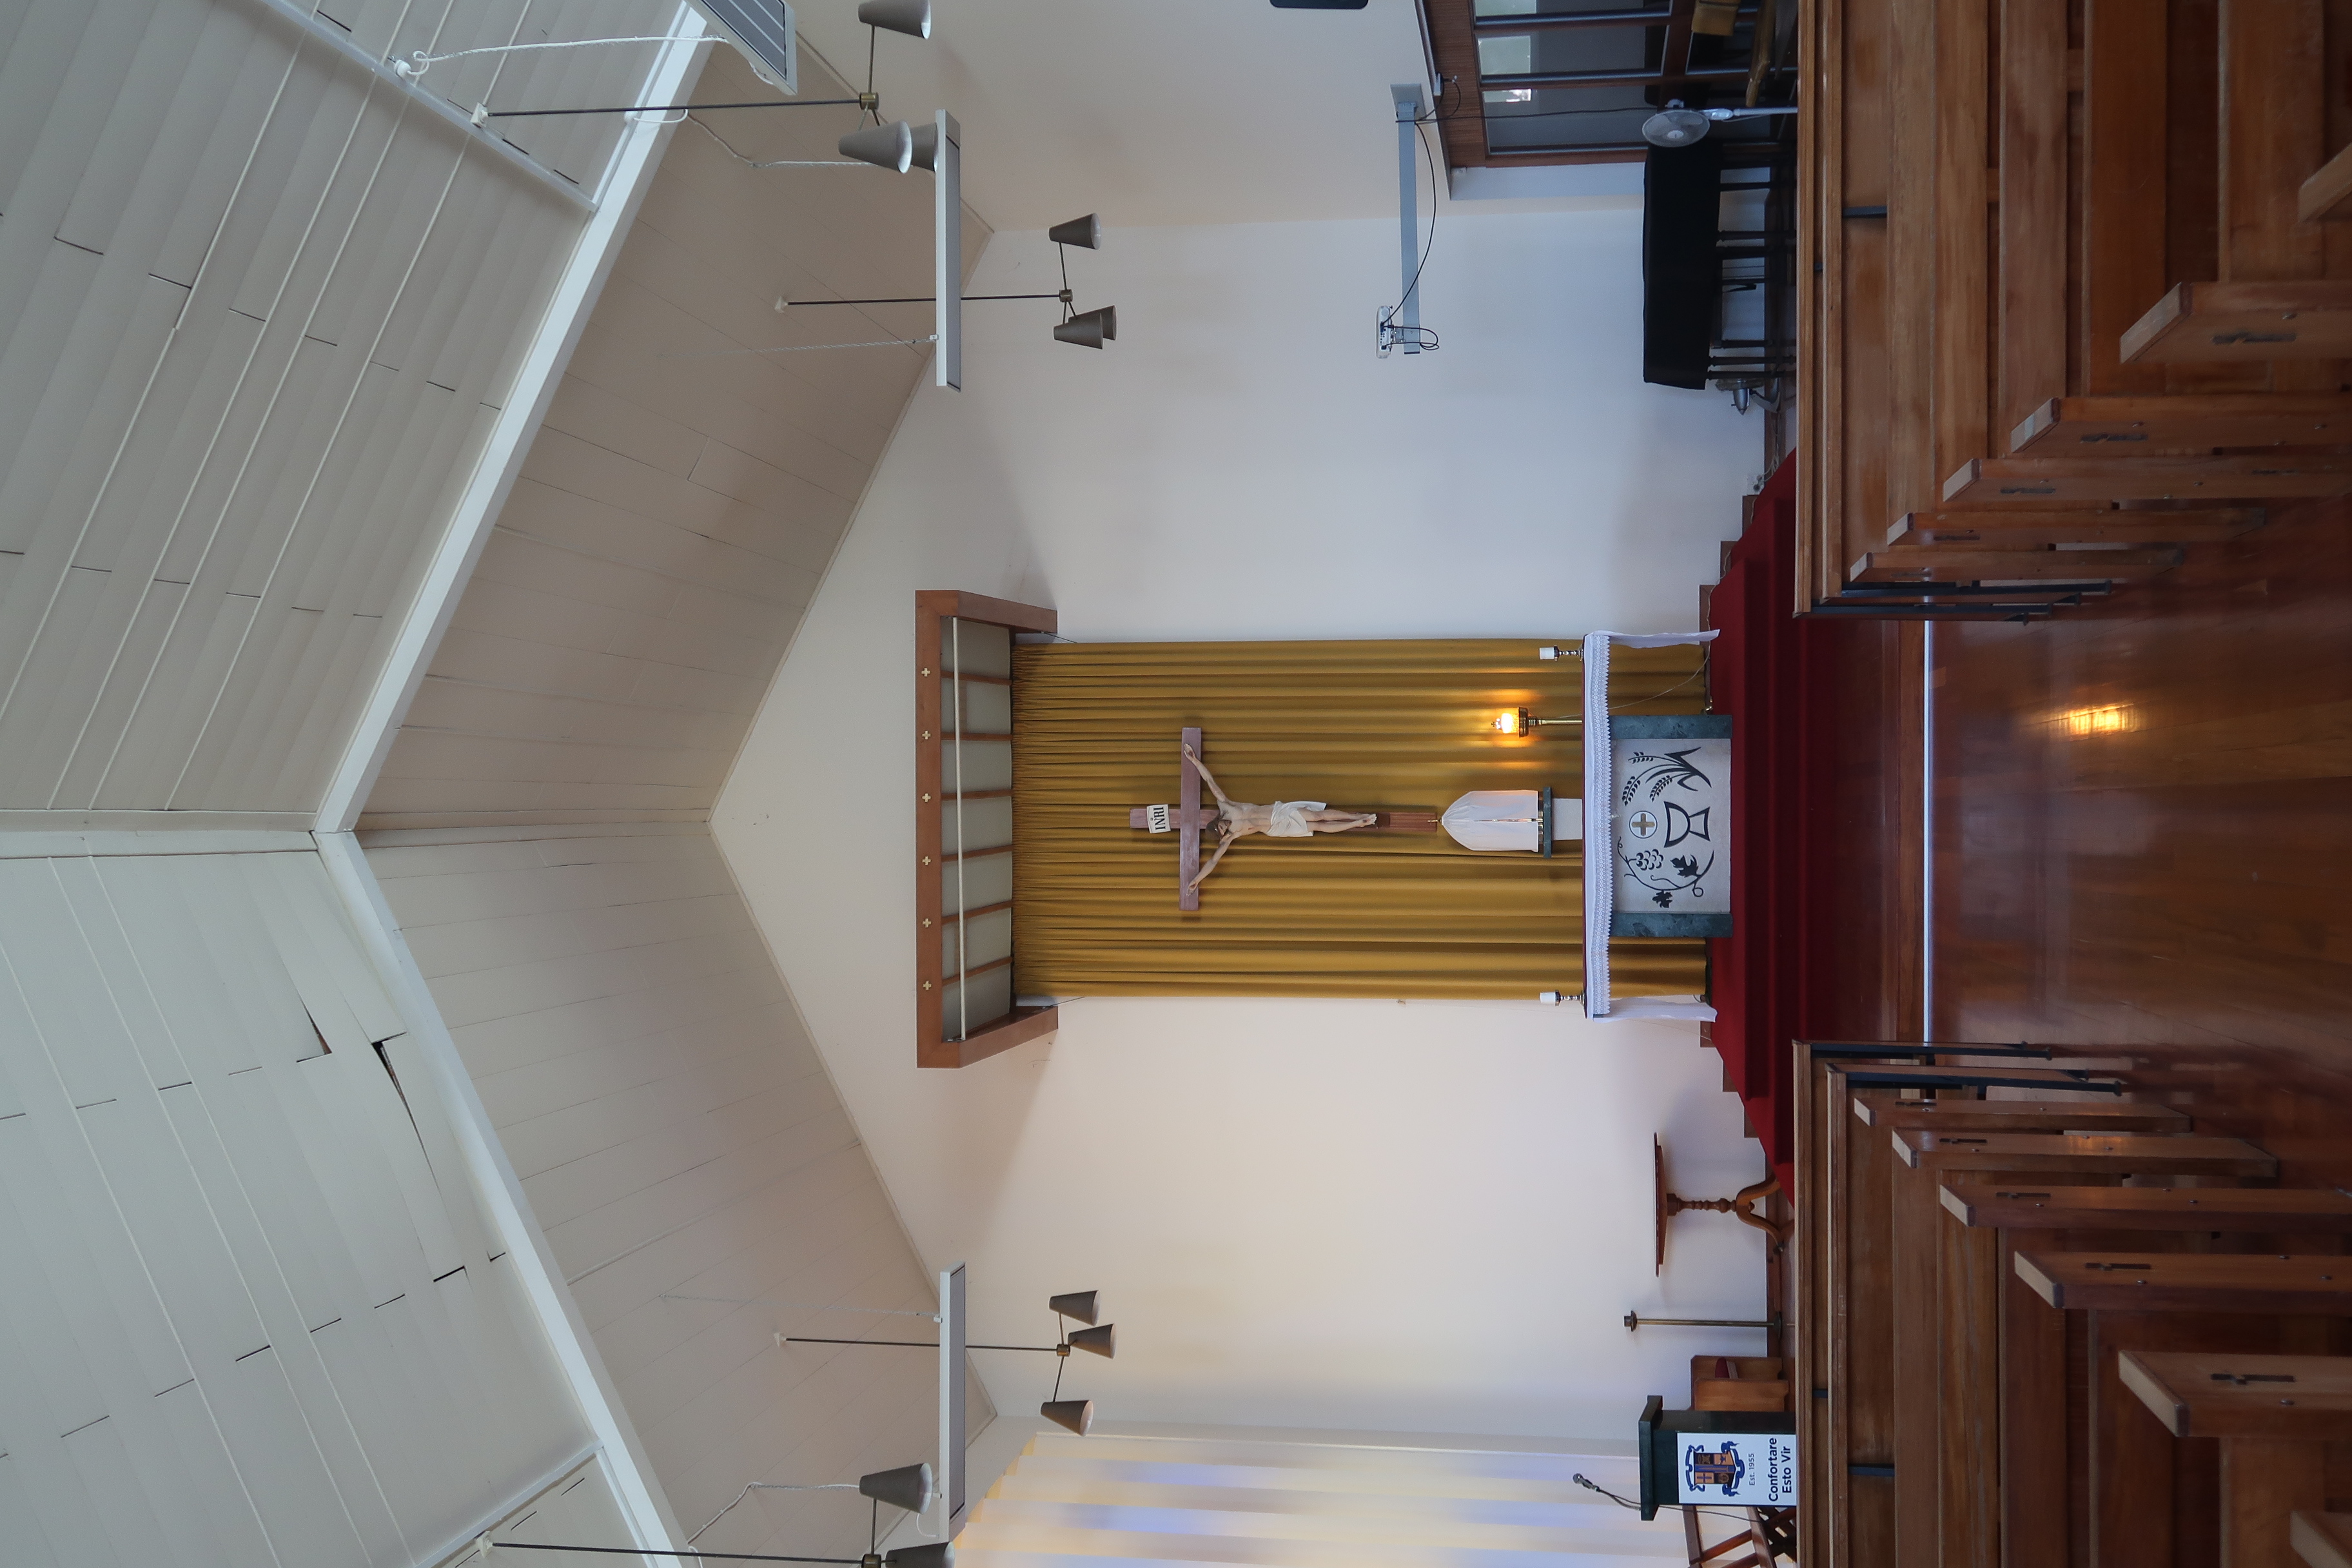 <p>The altar of the chapel at St Paul&#39;s College, Ponsonby, Auckland. The reproduction of&nbsp;<i>The Ponsonby Madonna&nbsp;</i>is located on the rear wall, facing the altar.&nbsp;</p>
